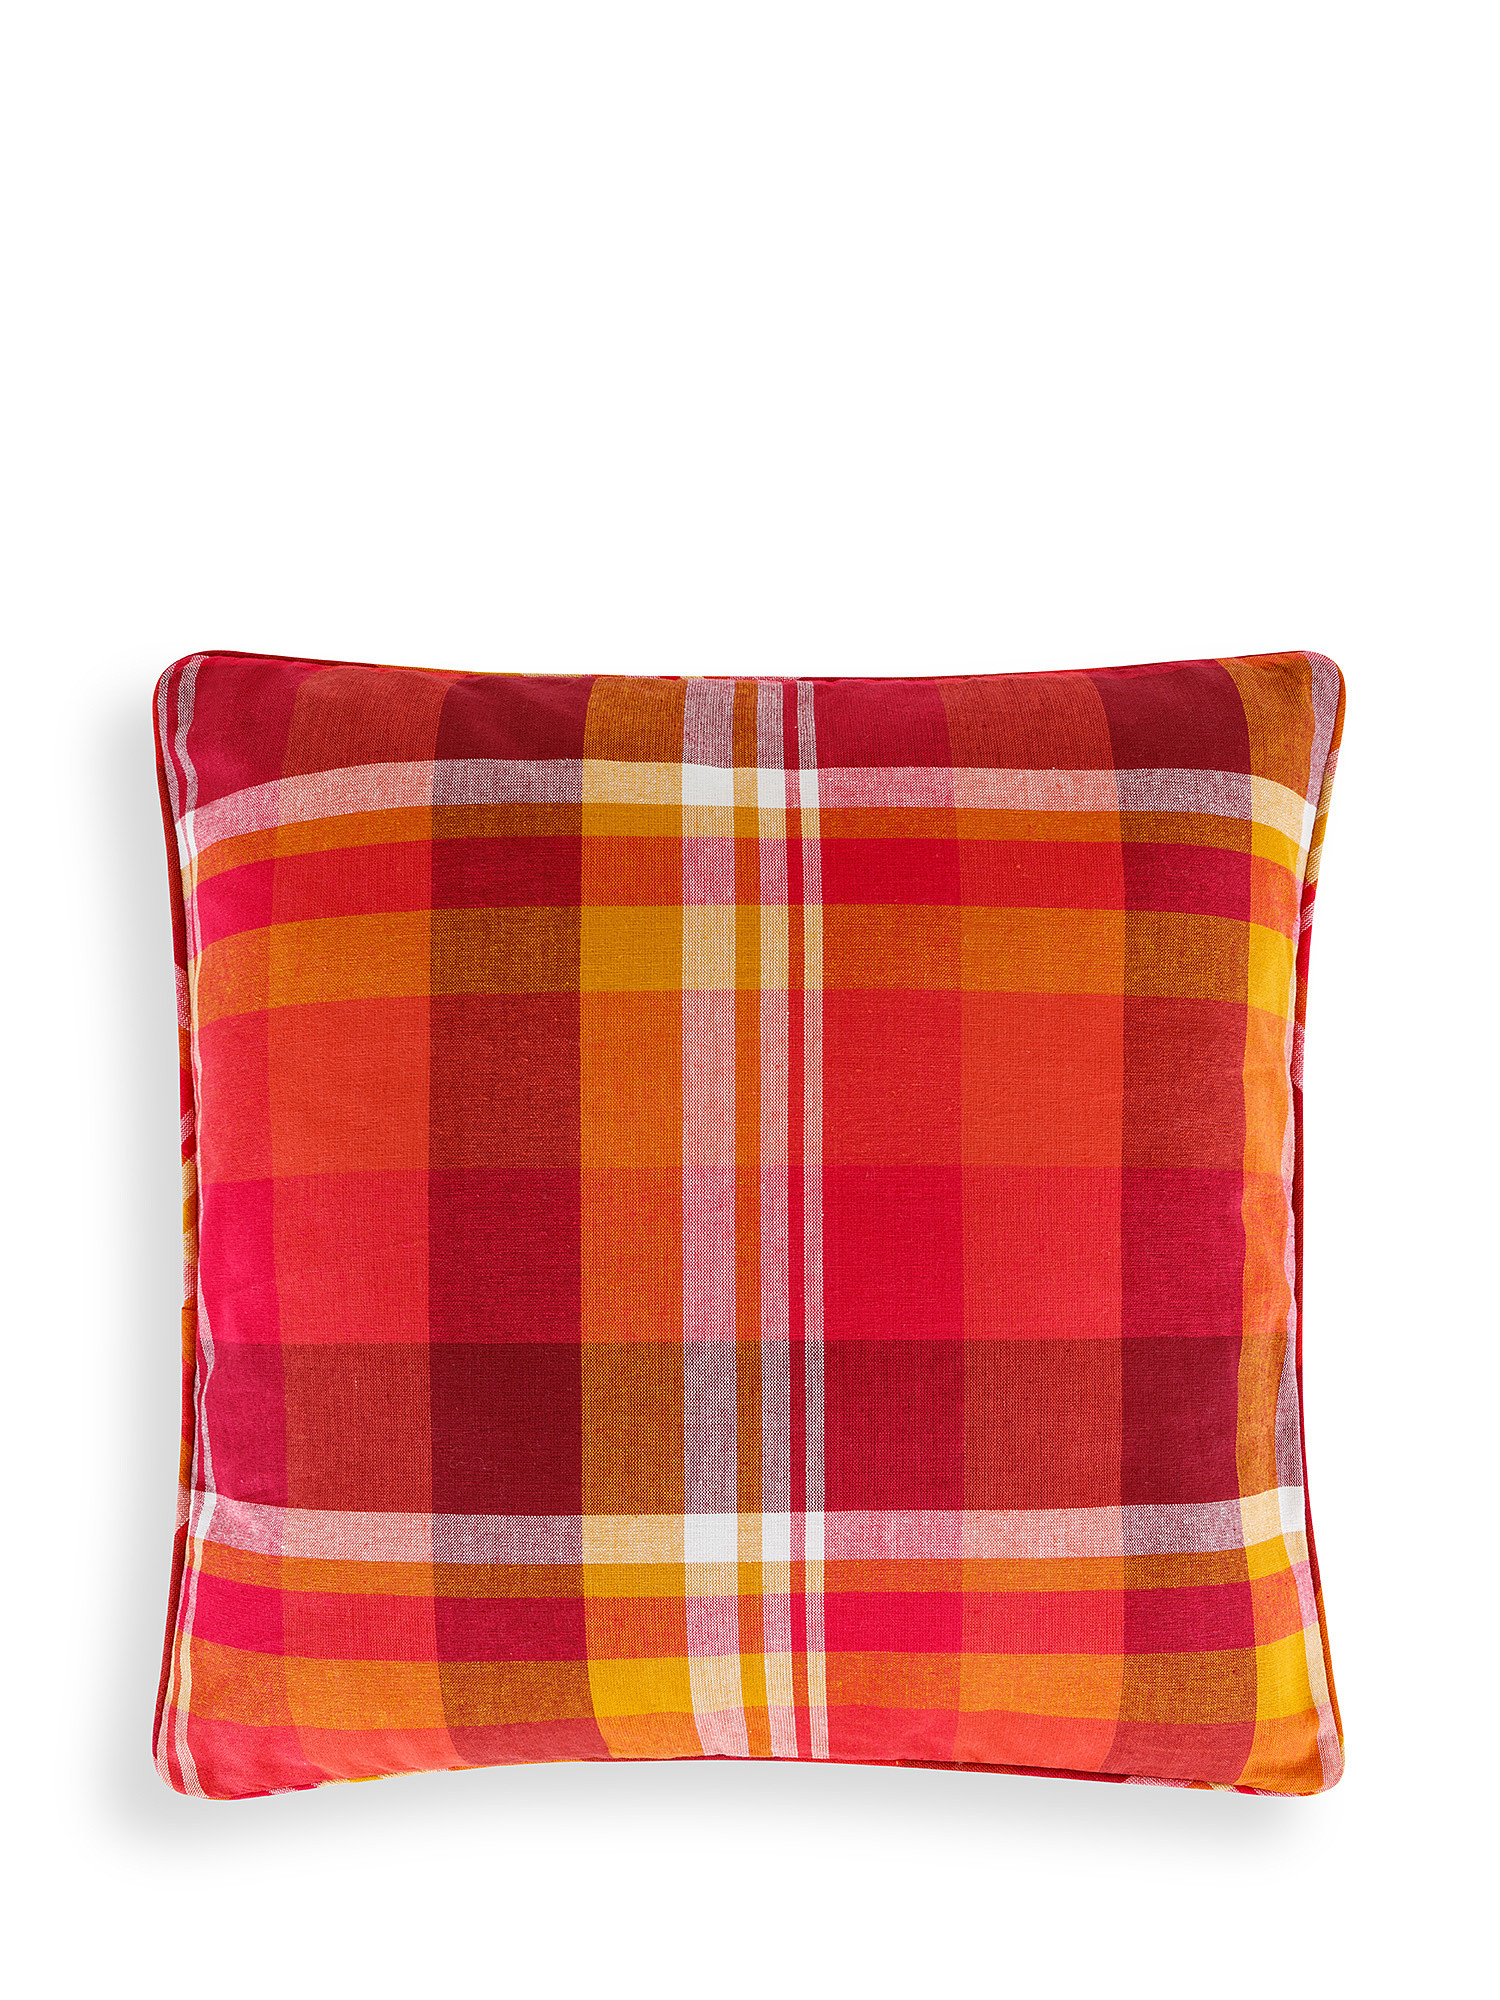 Cotton cushion with check pattern 45x45cm, Red, large image number 0